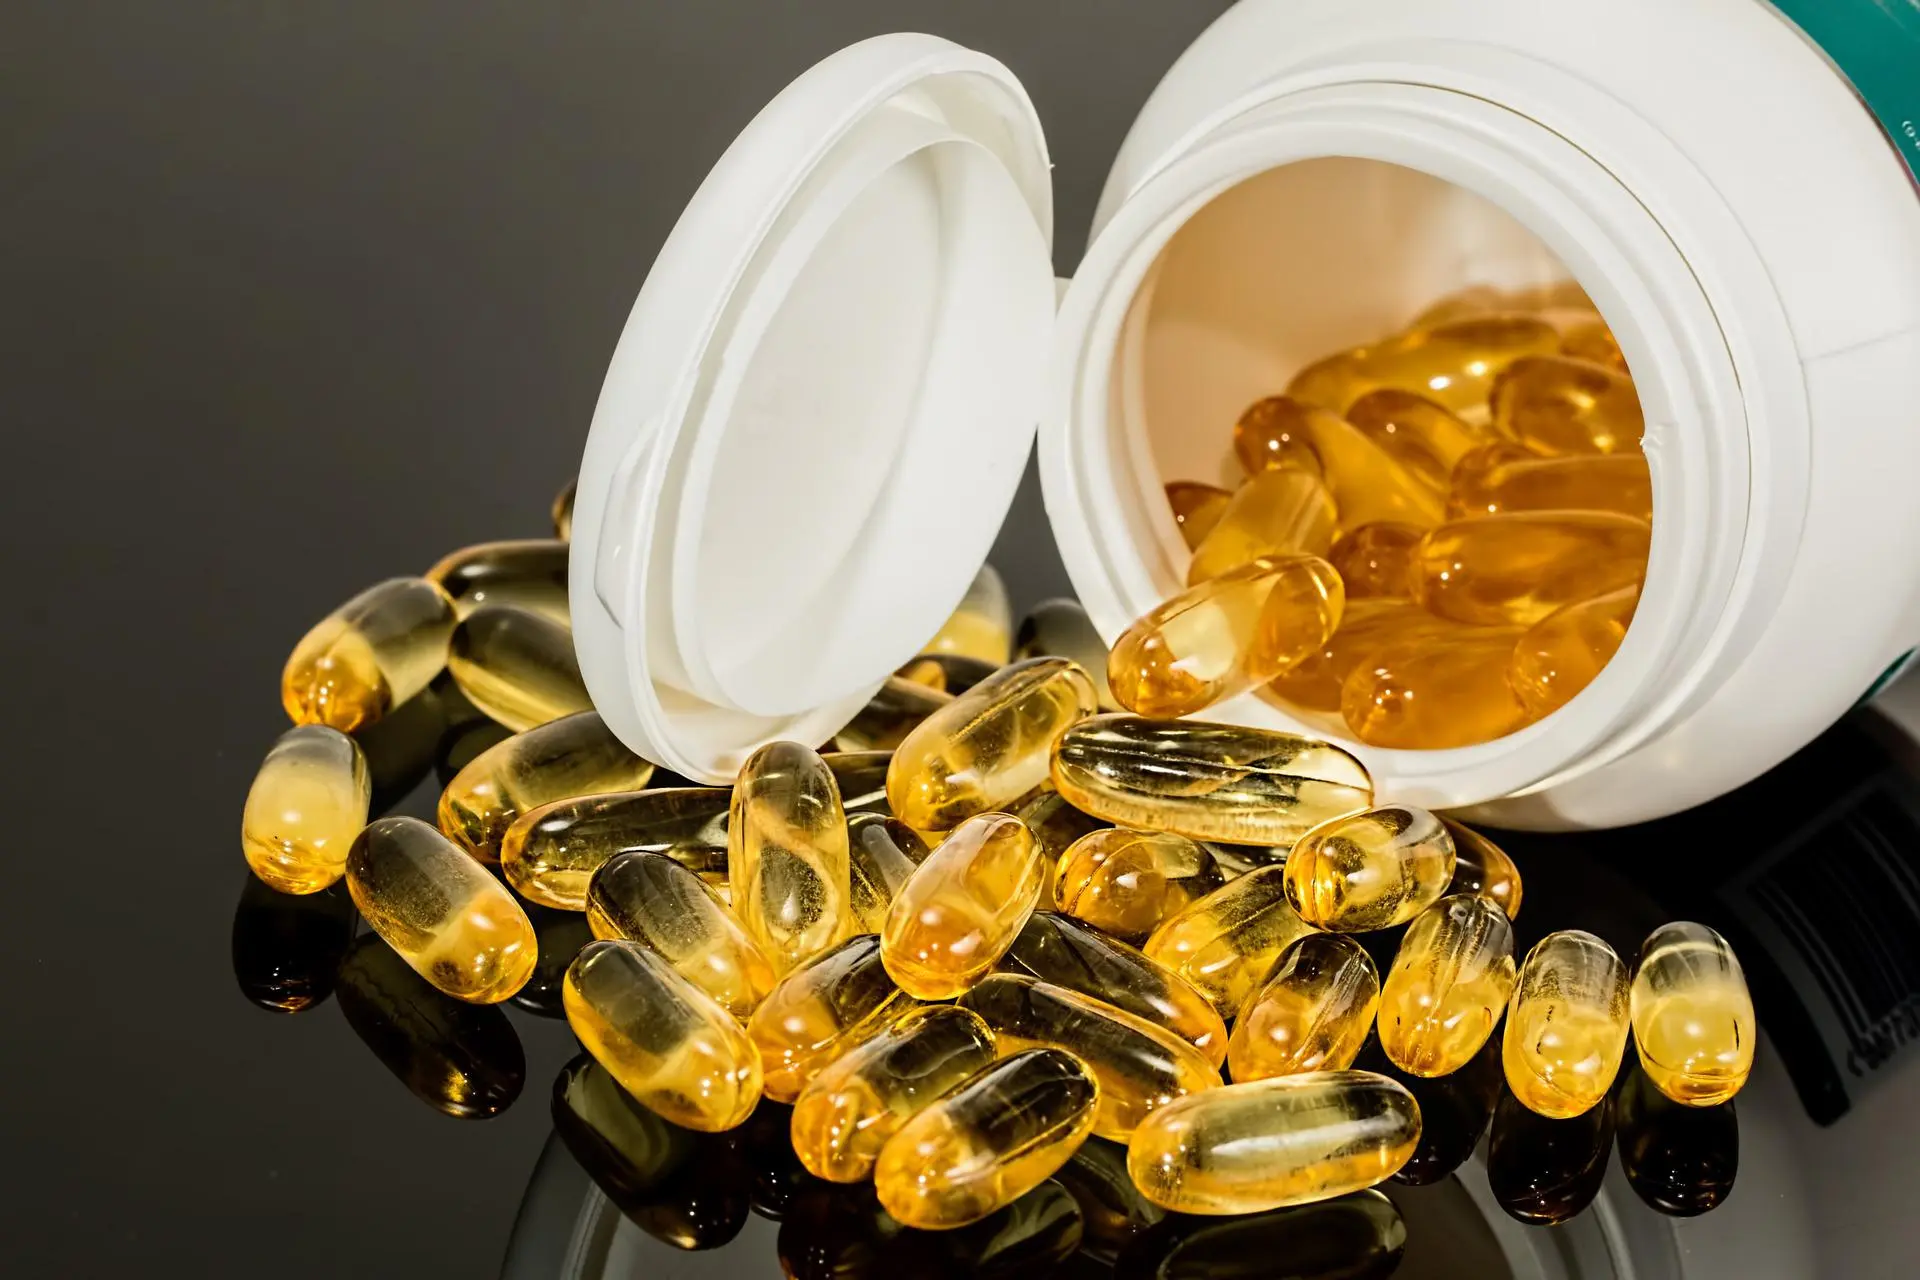 Learn more about anti-aging supplements